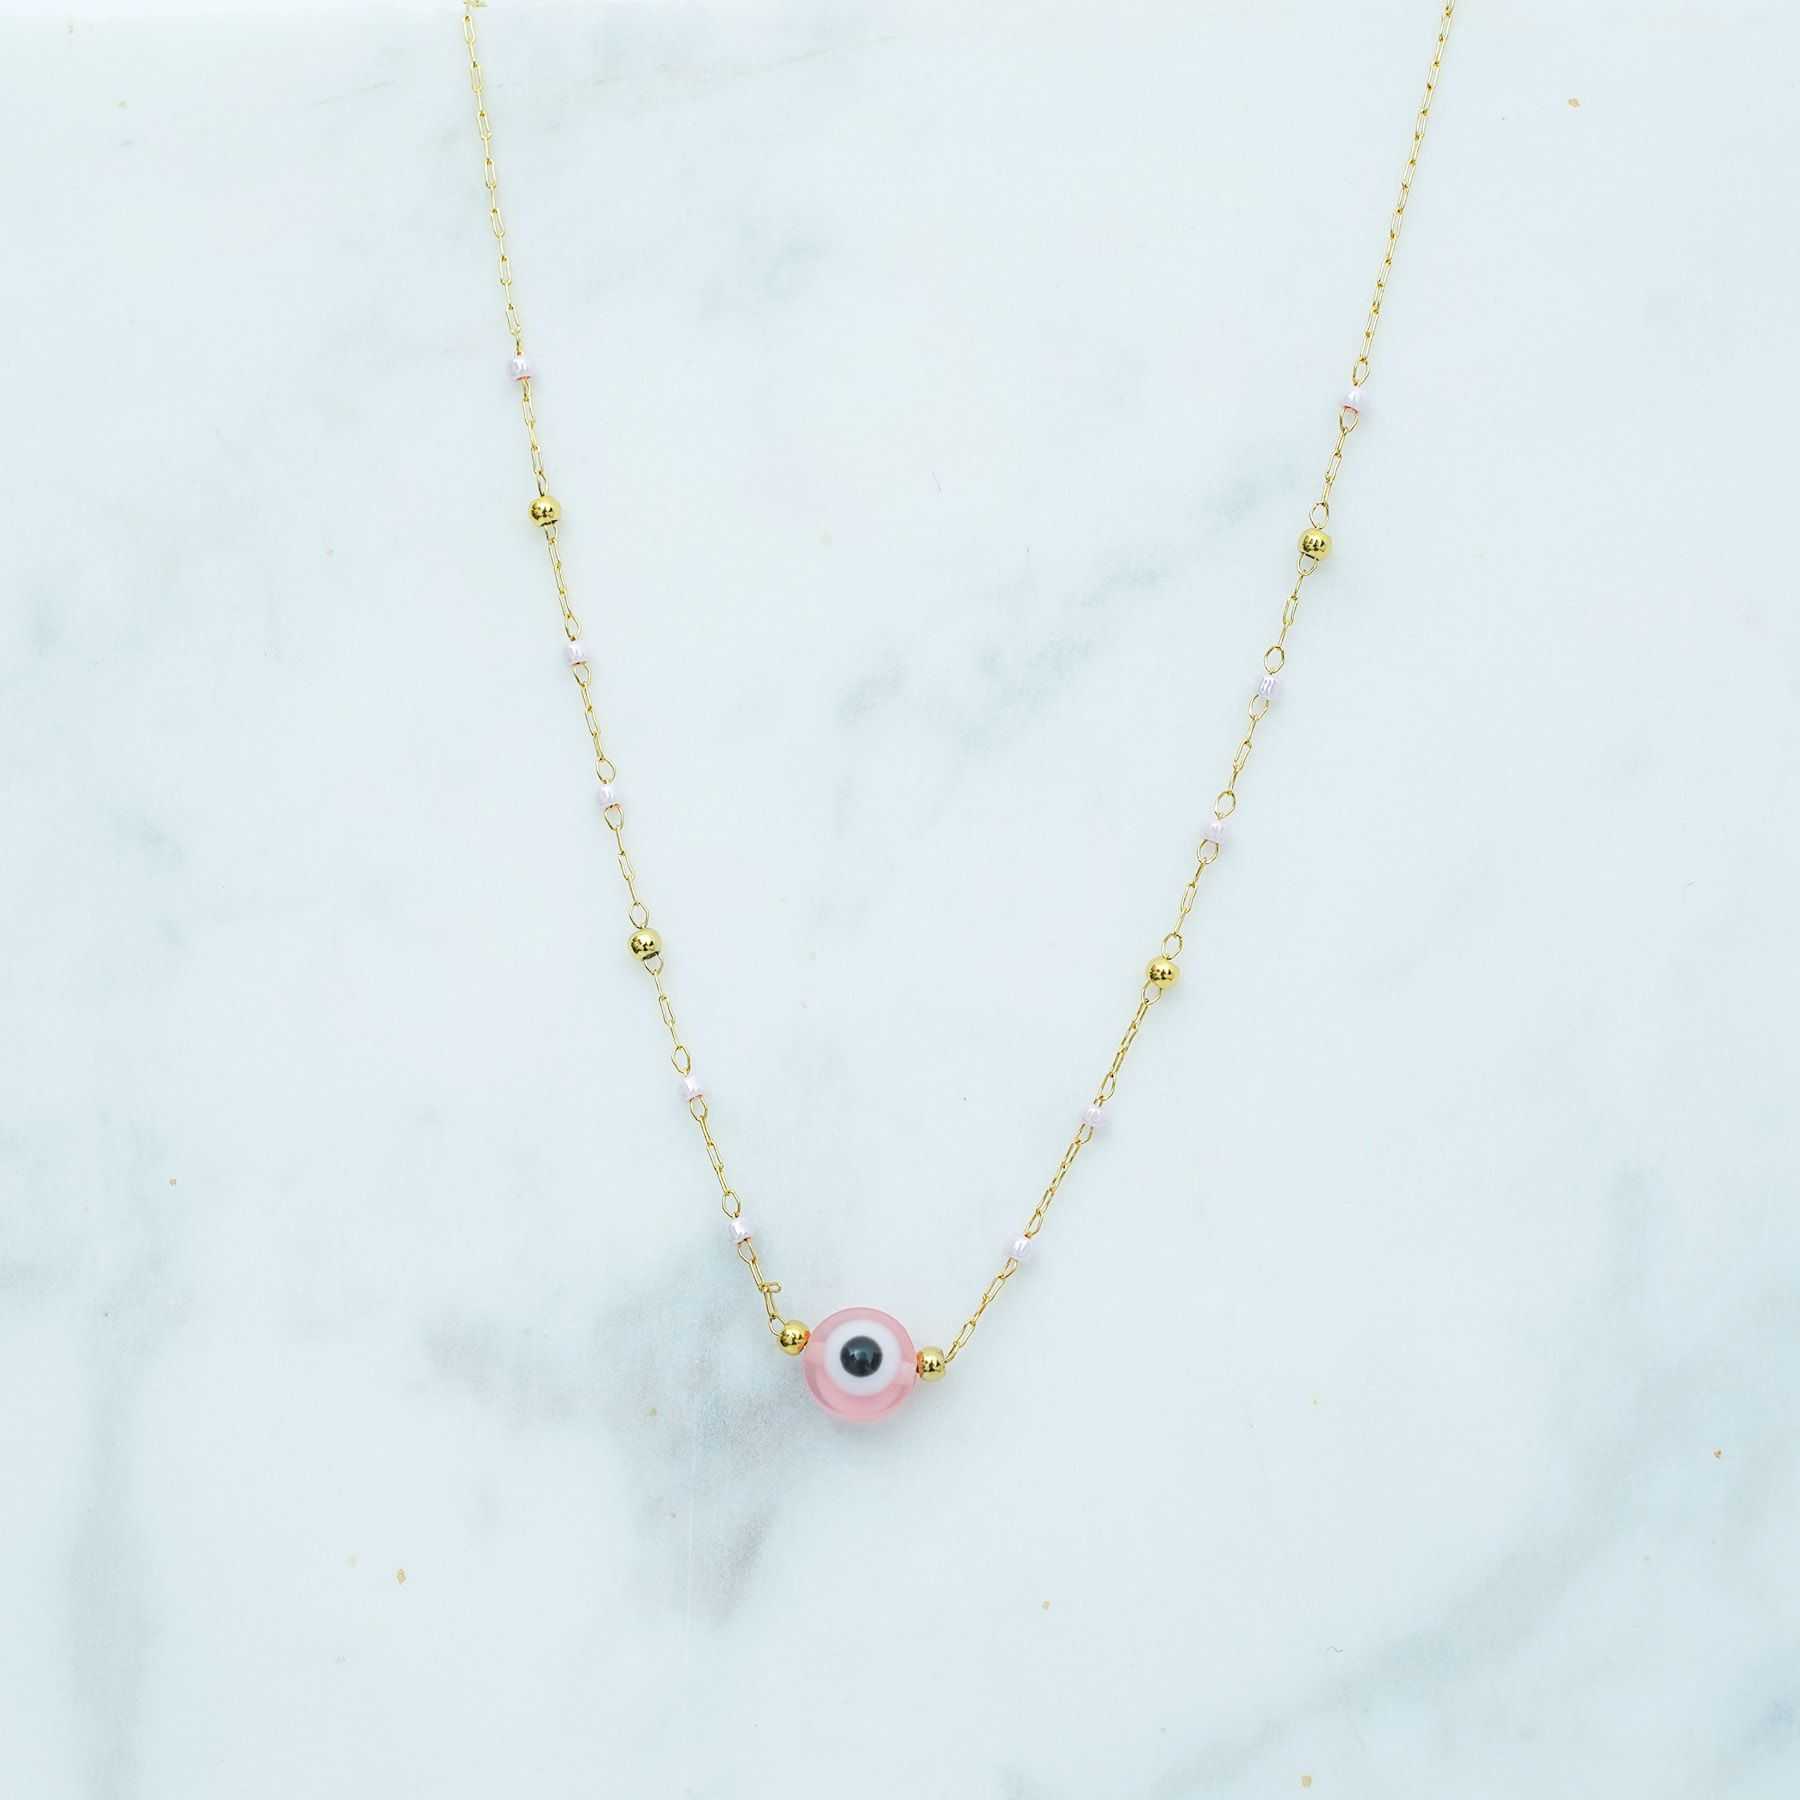 ELYSIAN NECKLACE - GOLD & PINK